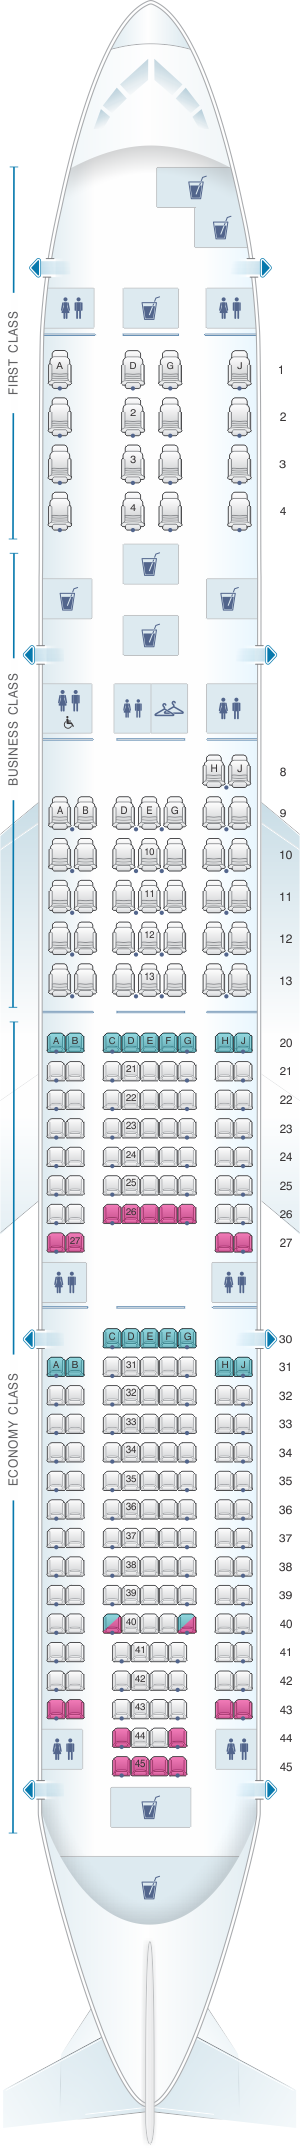 Seat map for American Airlines Boeing B777 200